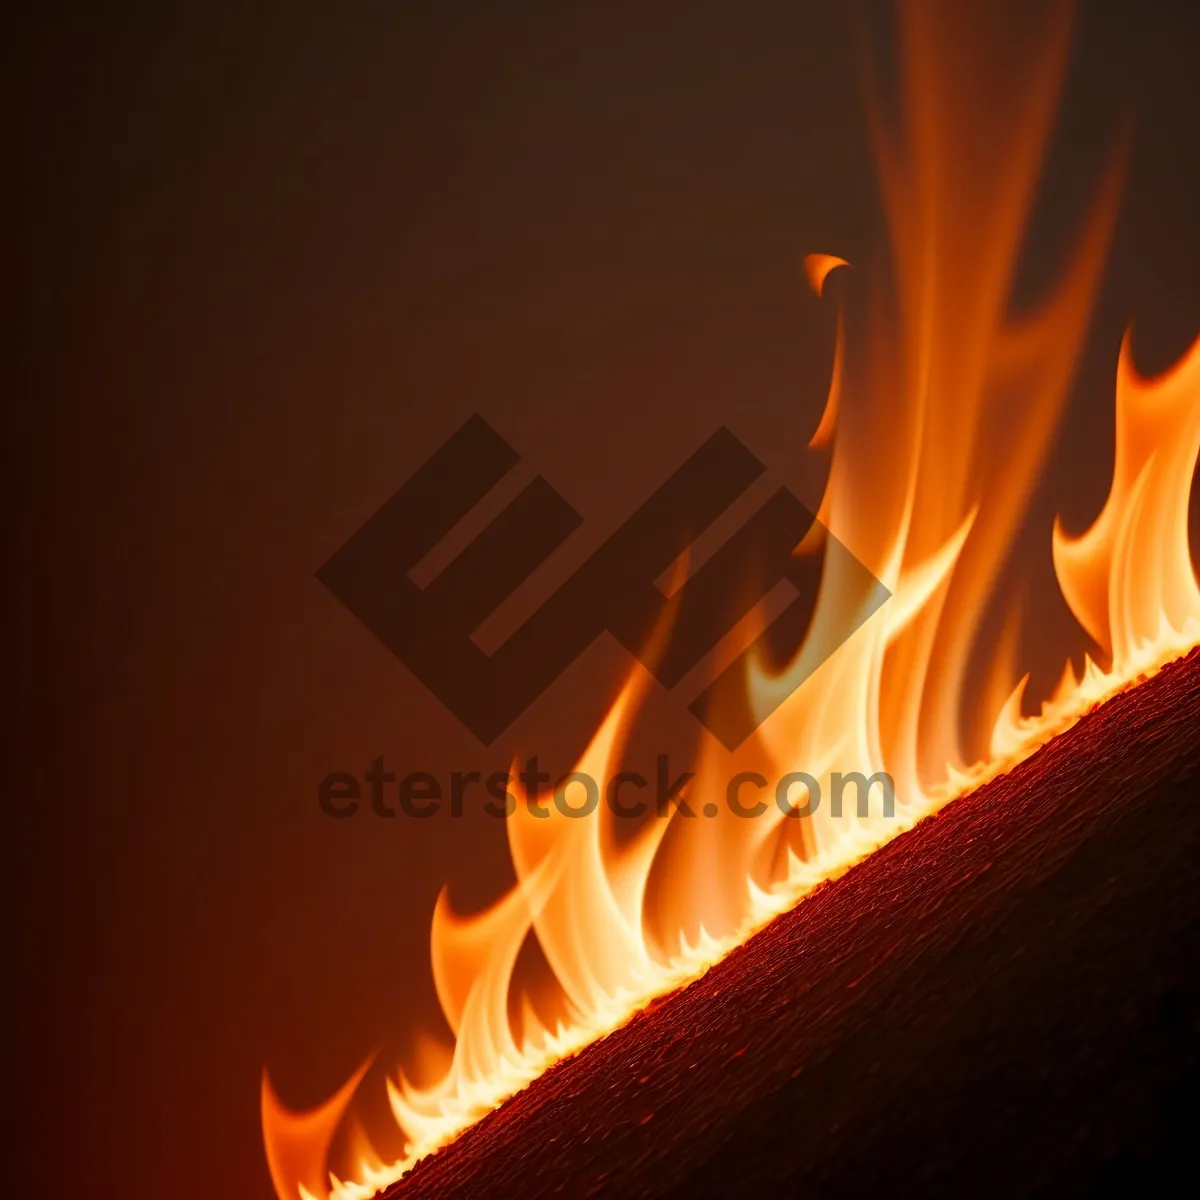 Picture of Fiery Blaze: A Captivating Display of Heat and Light